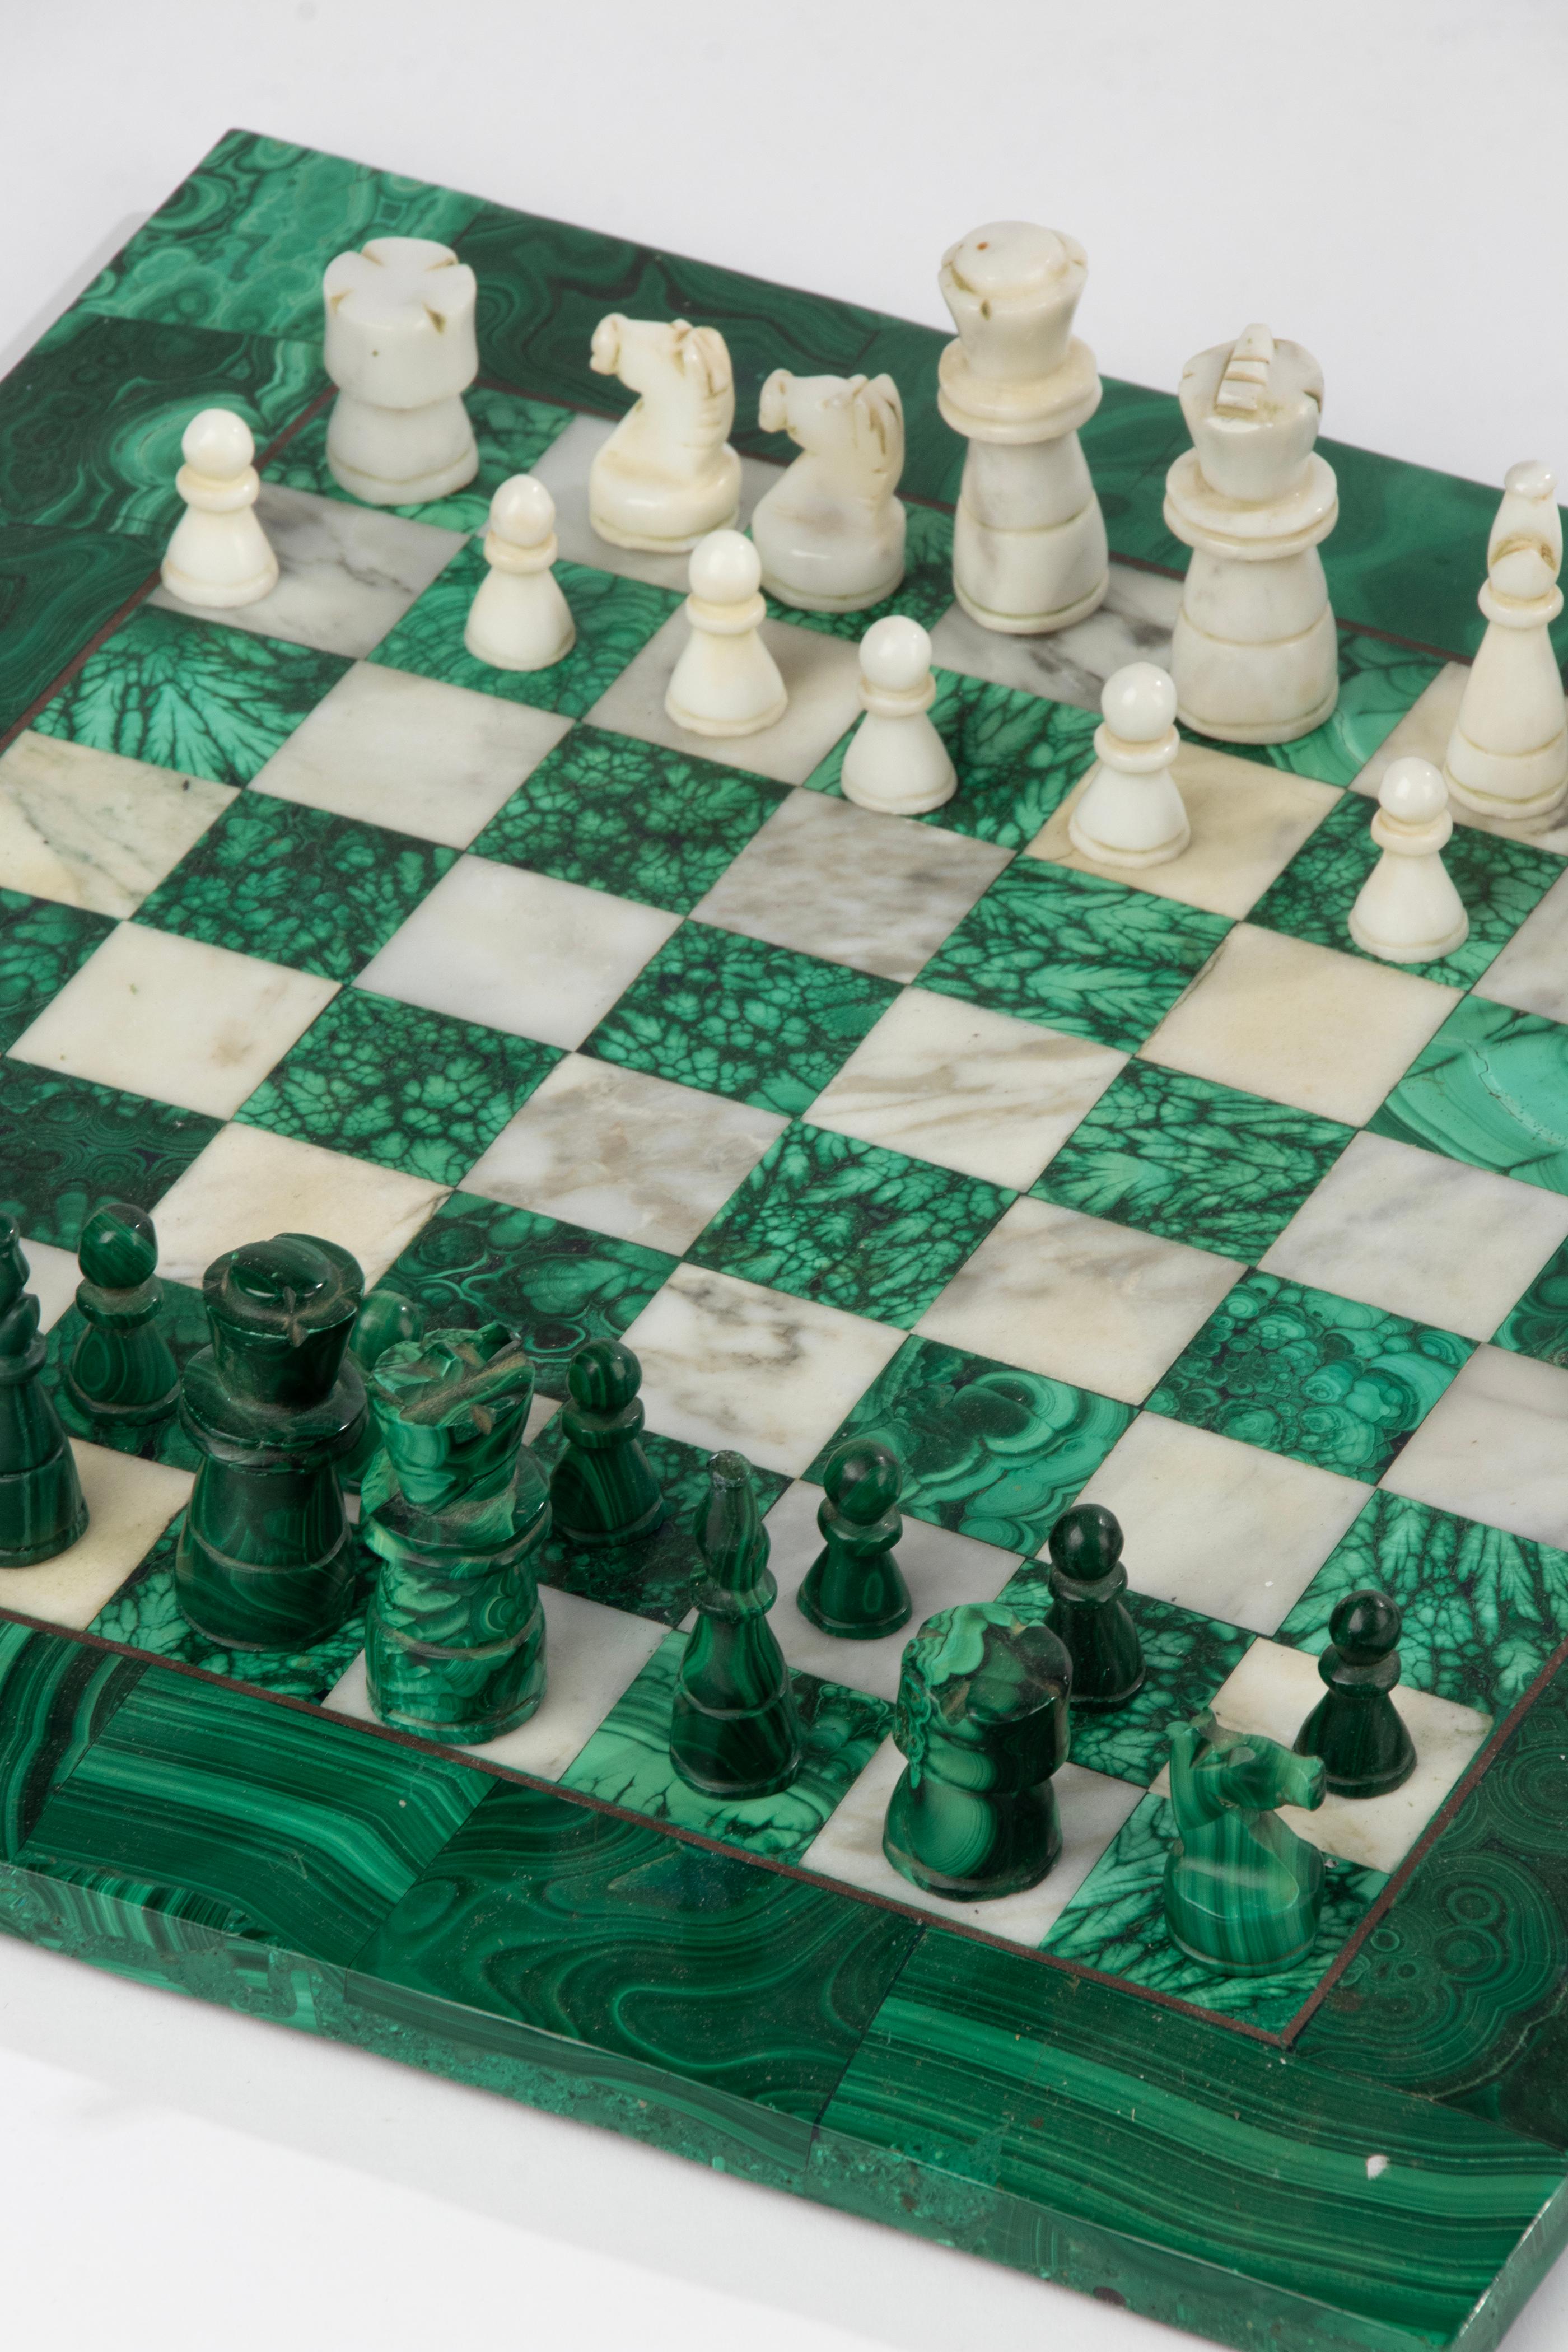 Mid-Century Modern chess set, made of malachite and marble. The chess set is probably made in Italy, around 1960.
The chess pieces are also made of malachite and marble. The chess pieces are 3 to 6 cm high. The size of the chessboard is 36 x 36 cm.